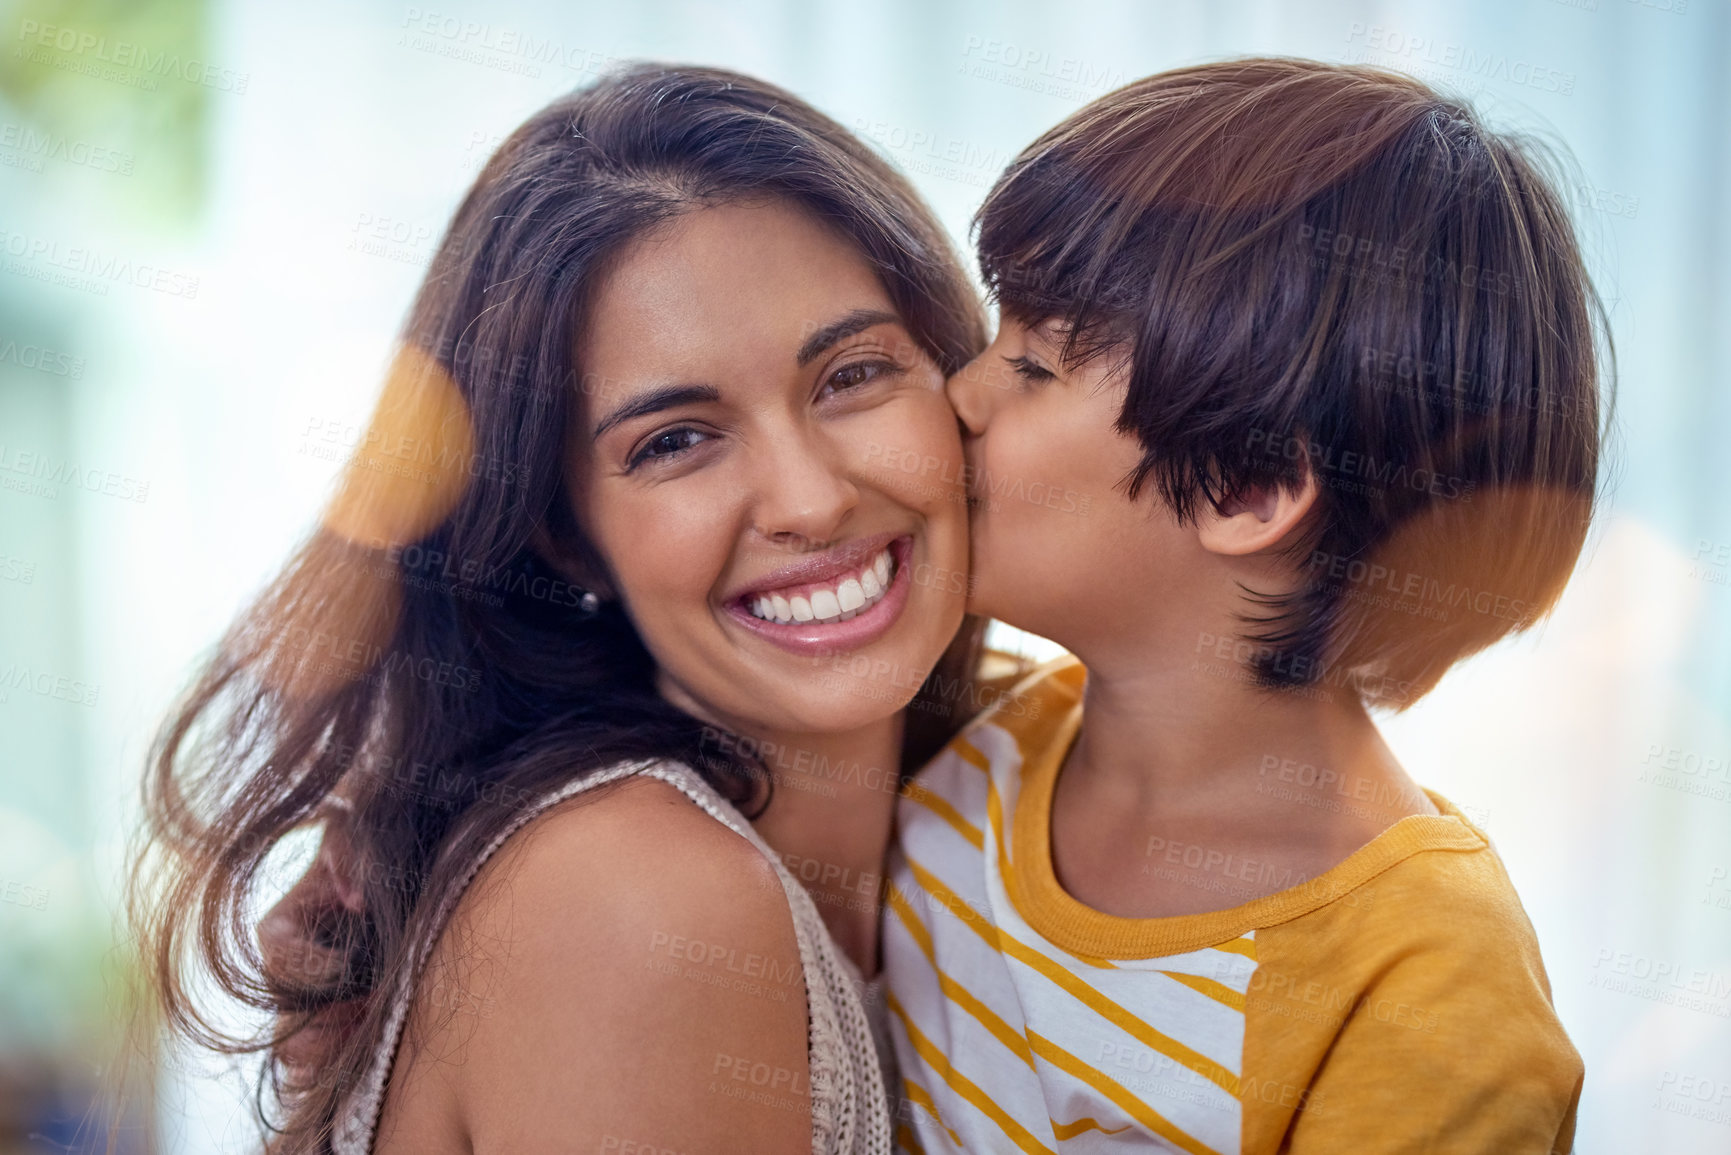 Buy stock photo Shot of an adorable little boy affectionately kissing his mother at home